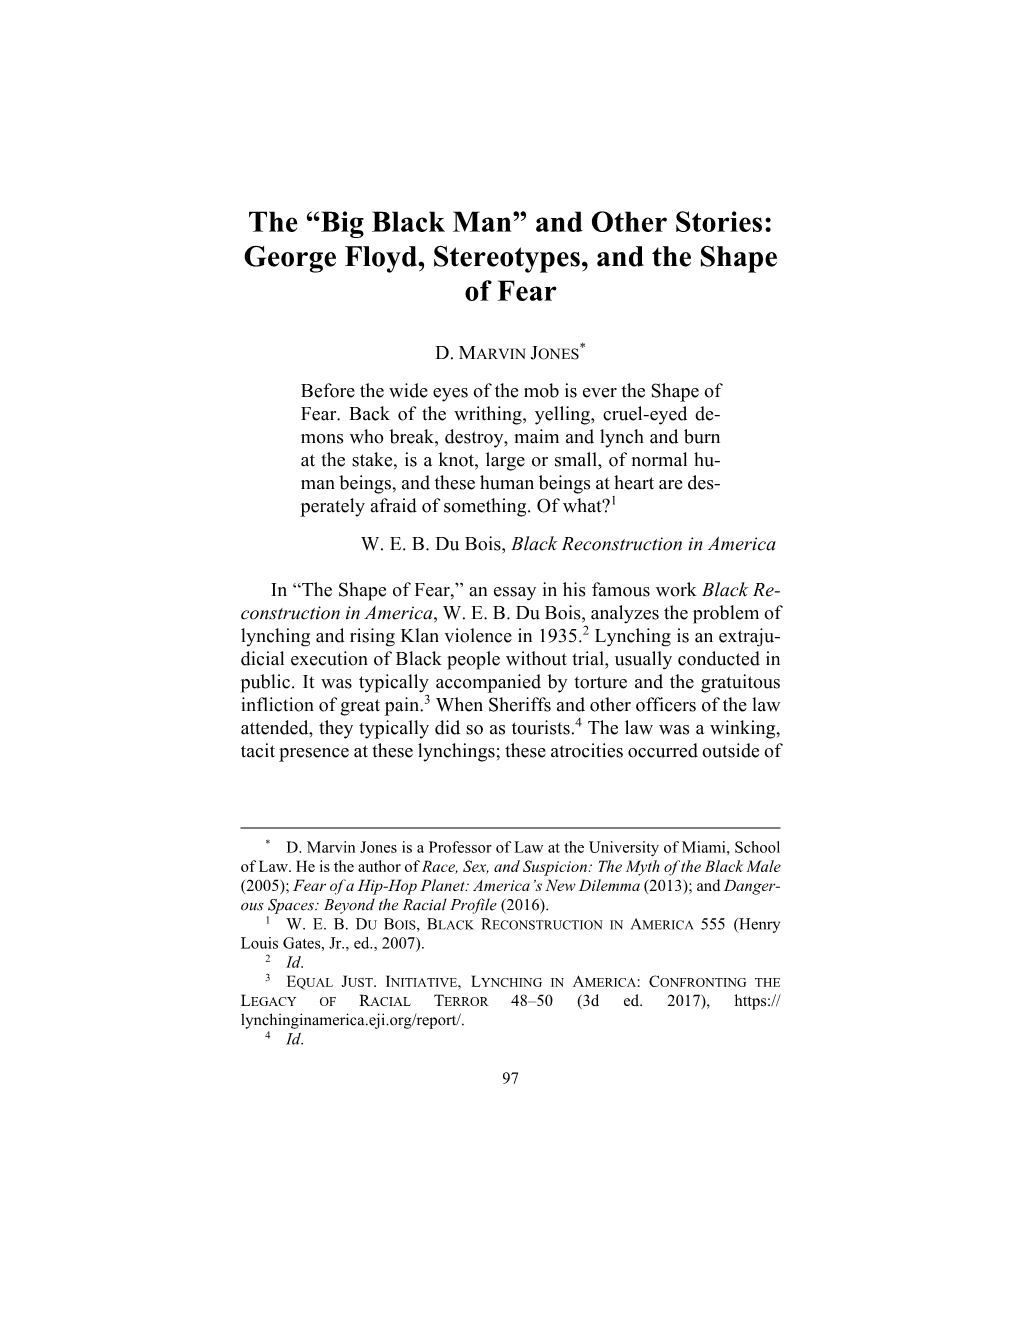 The “Big Black Man” and Other Stories: George Floyd, Stereotypes, and the Shape of Fear